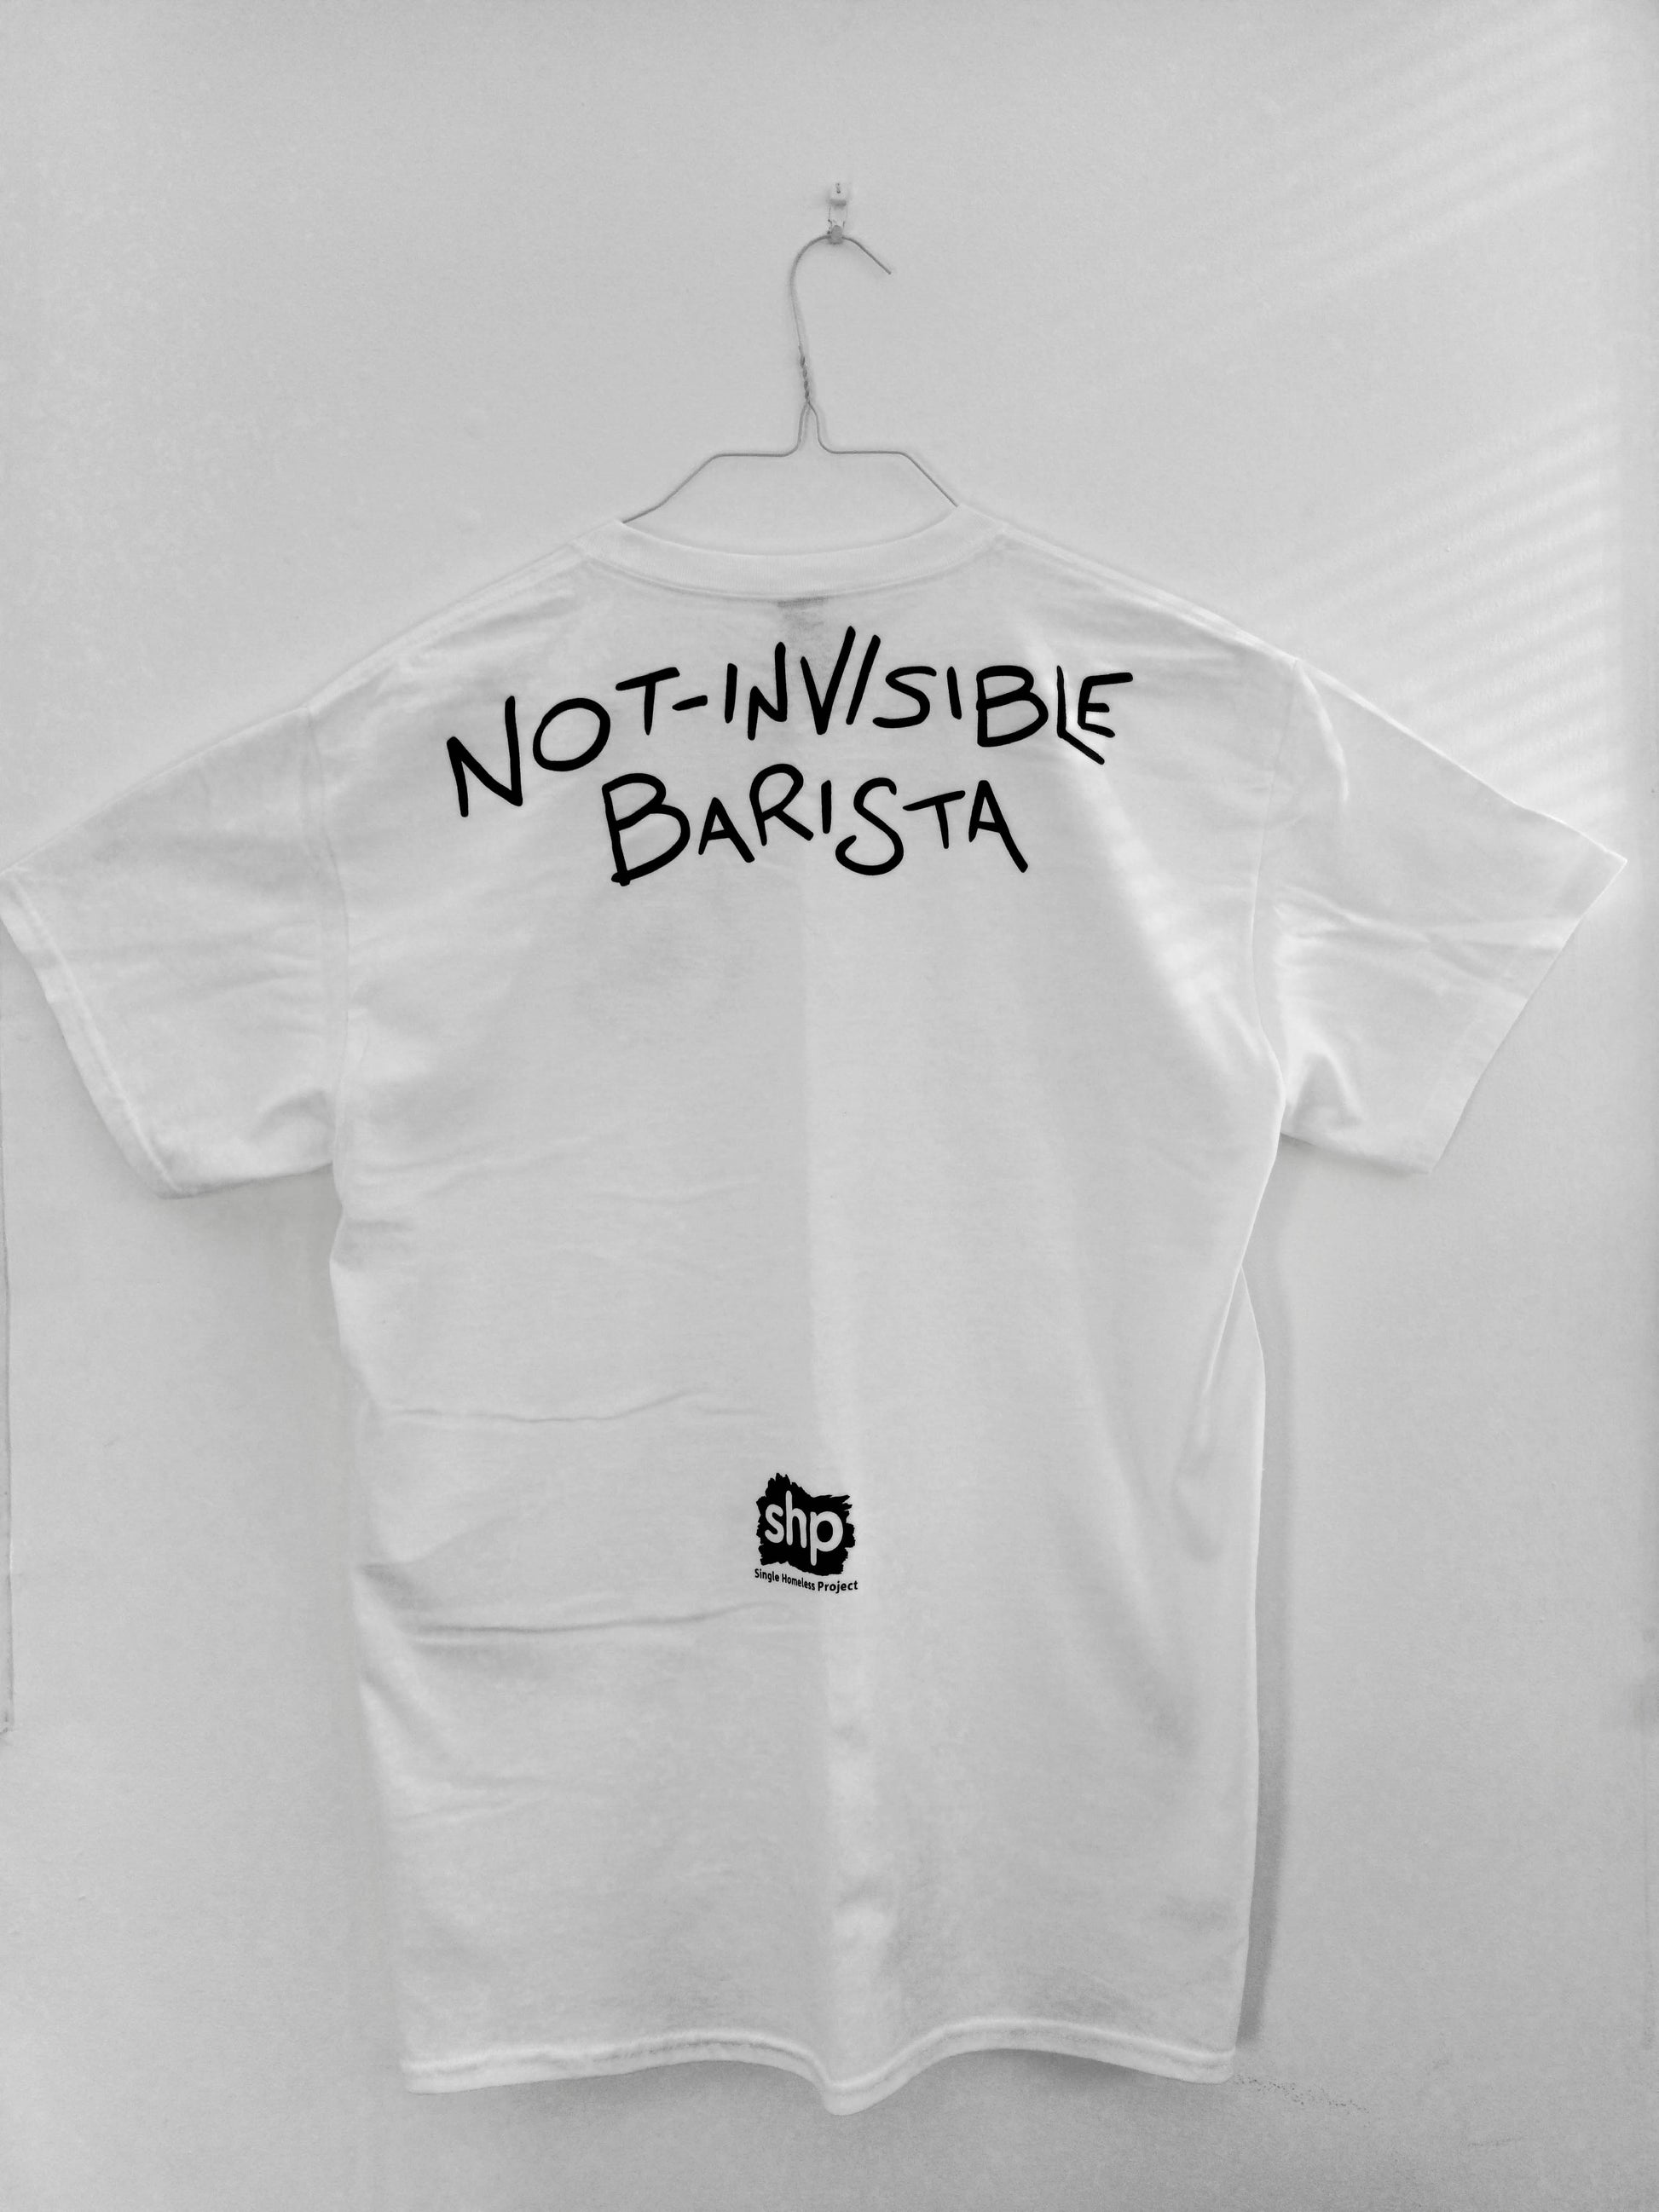 White t-shirt with "not-invisible barista" and SHP logo on the back.